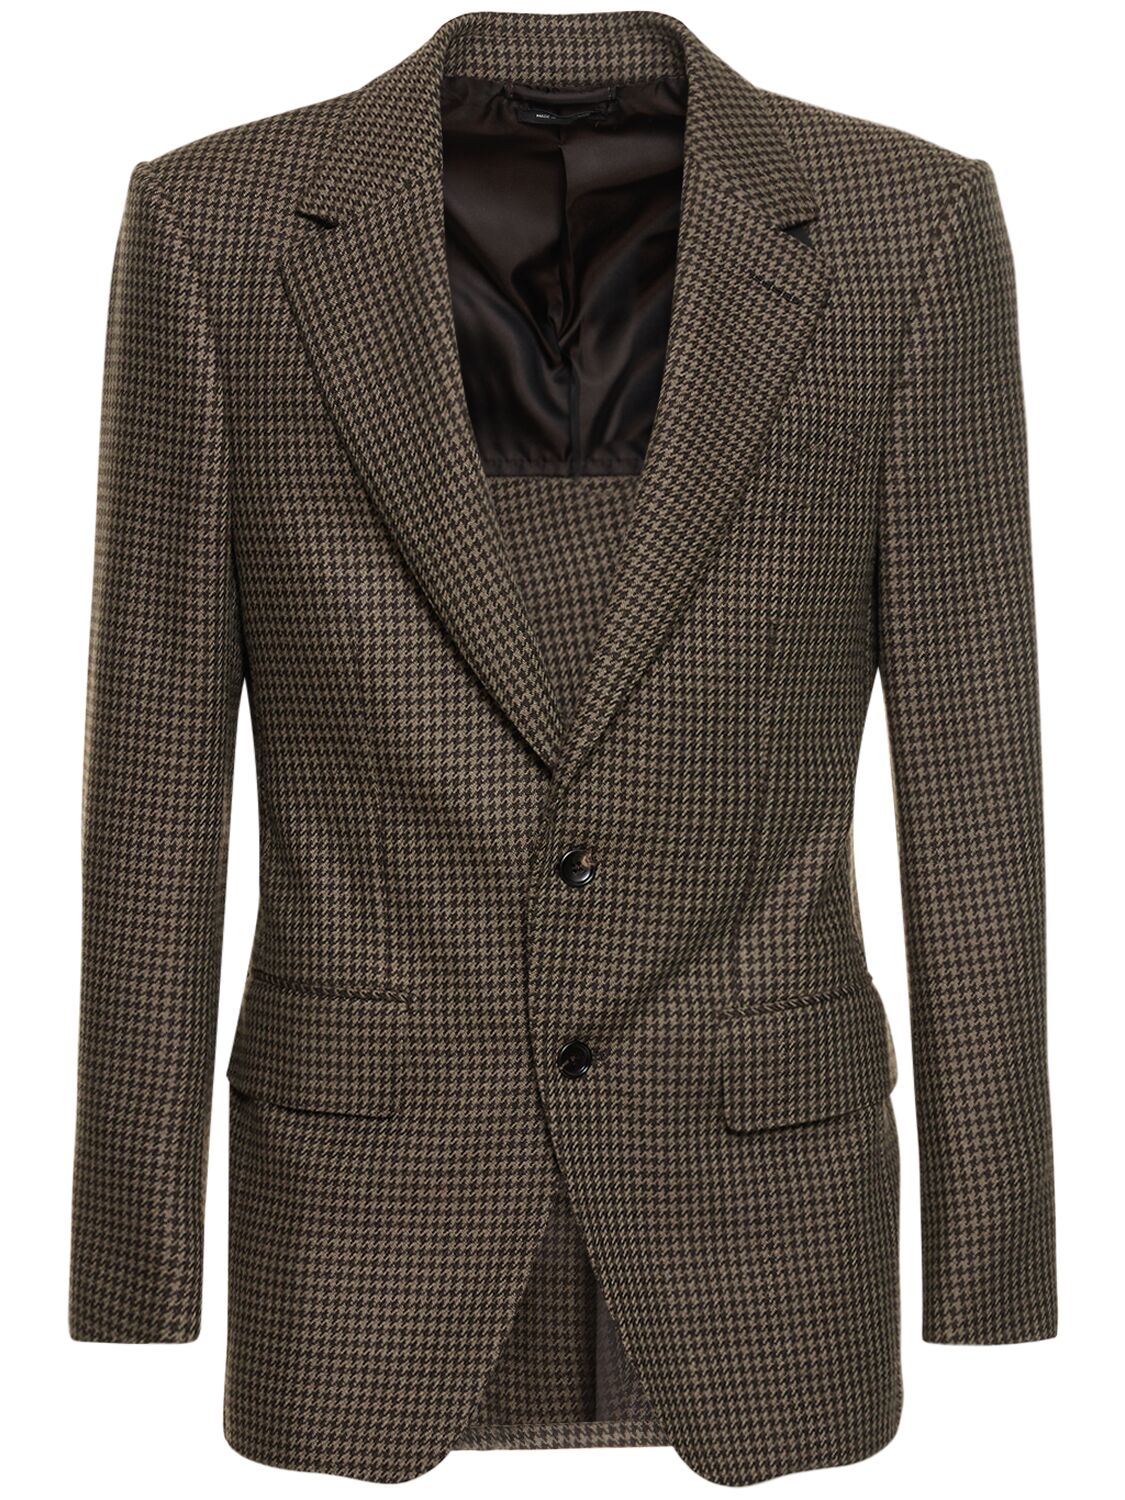 Tom Ford Atticus Wool Houndstooth Jacket In Green,brown